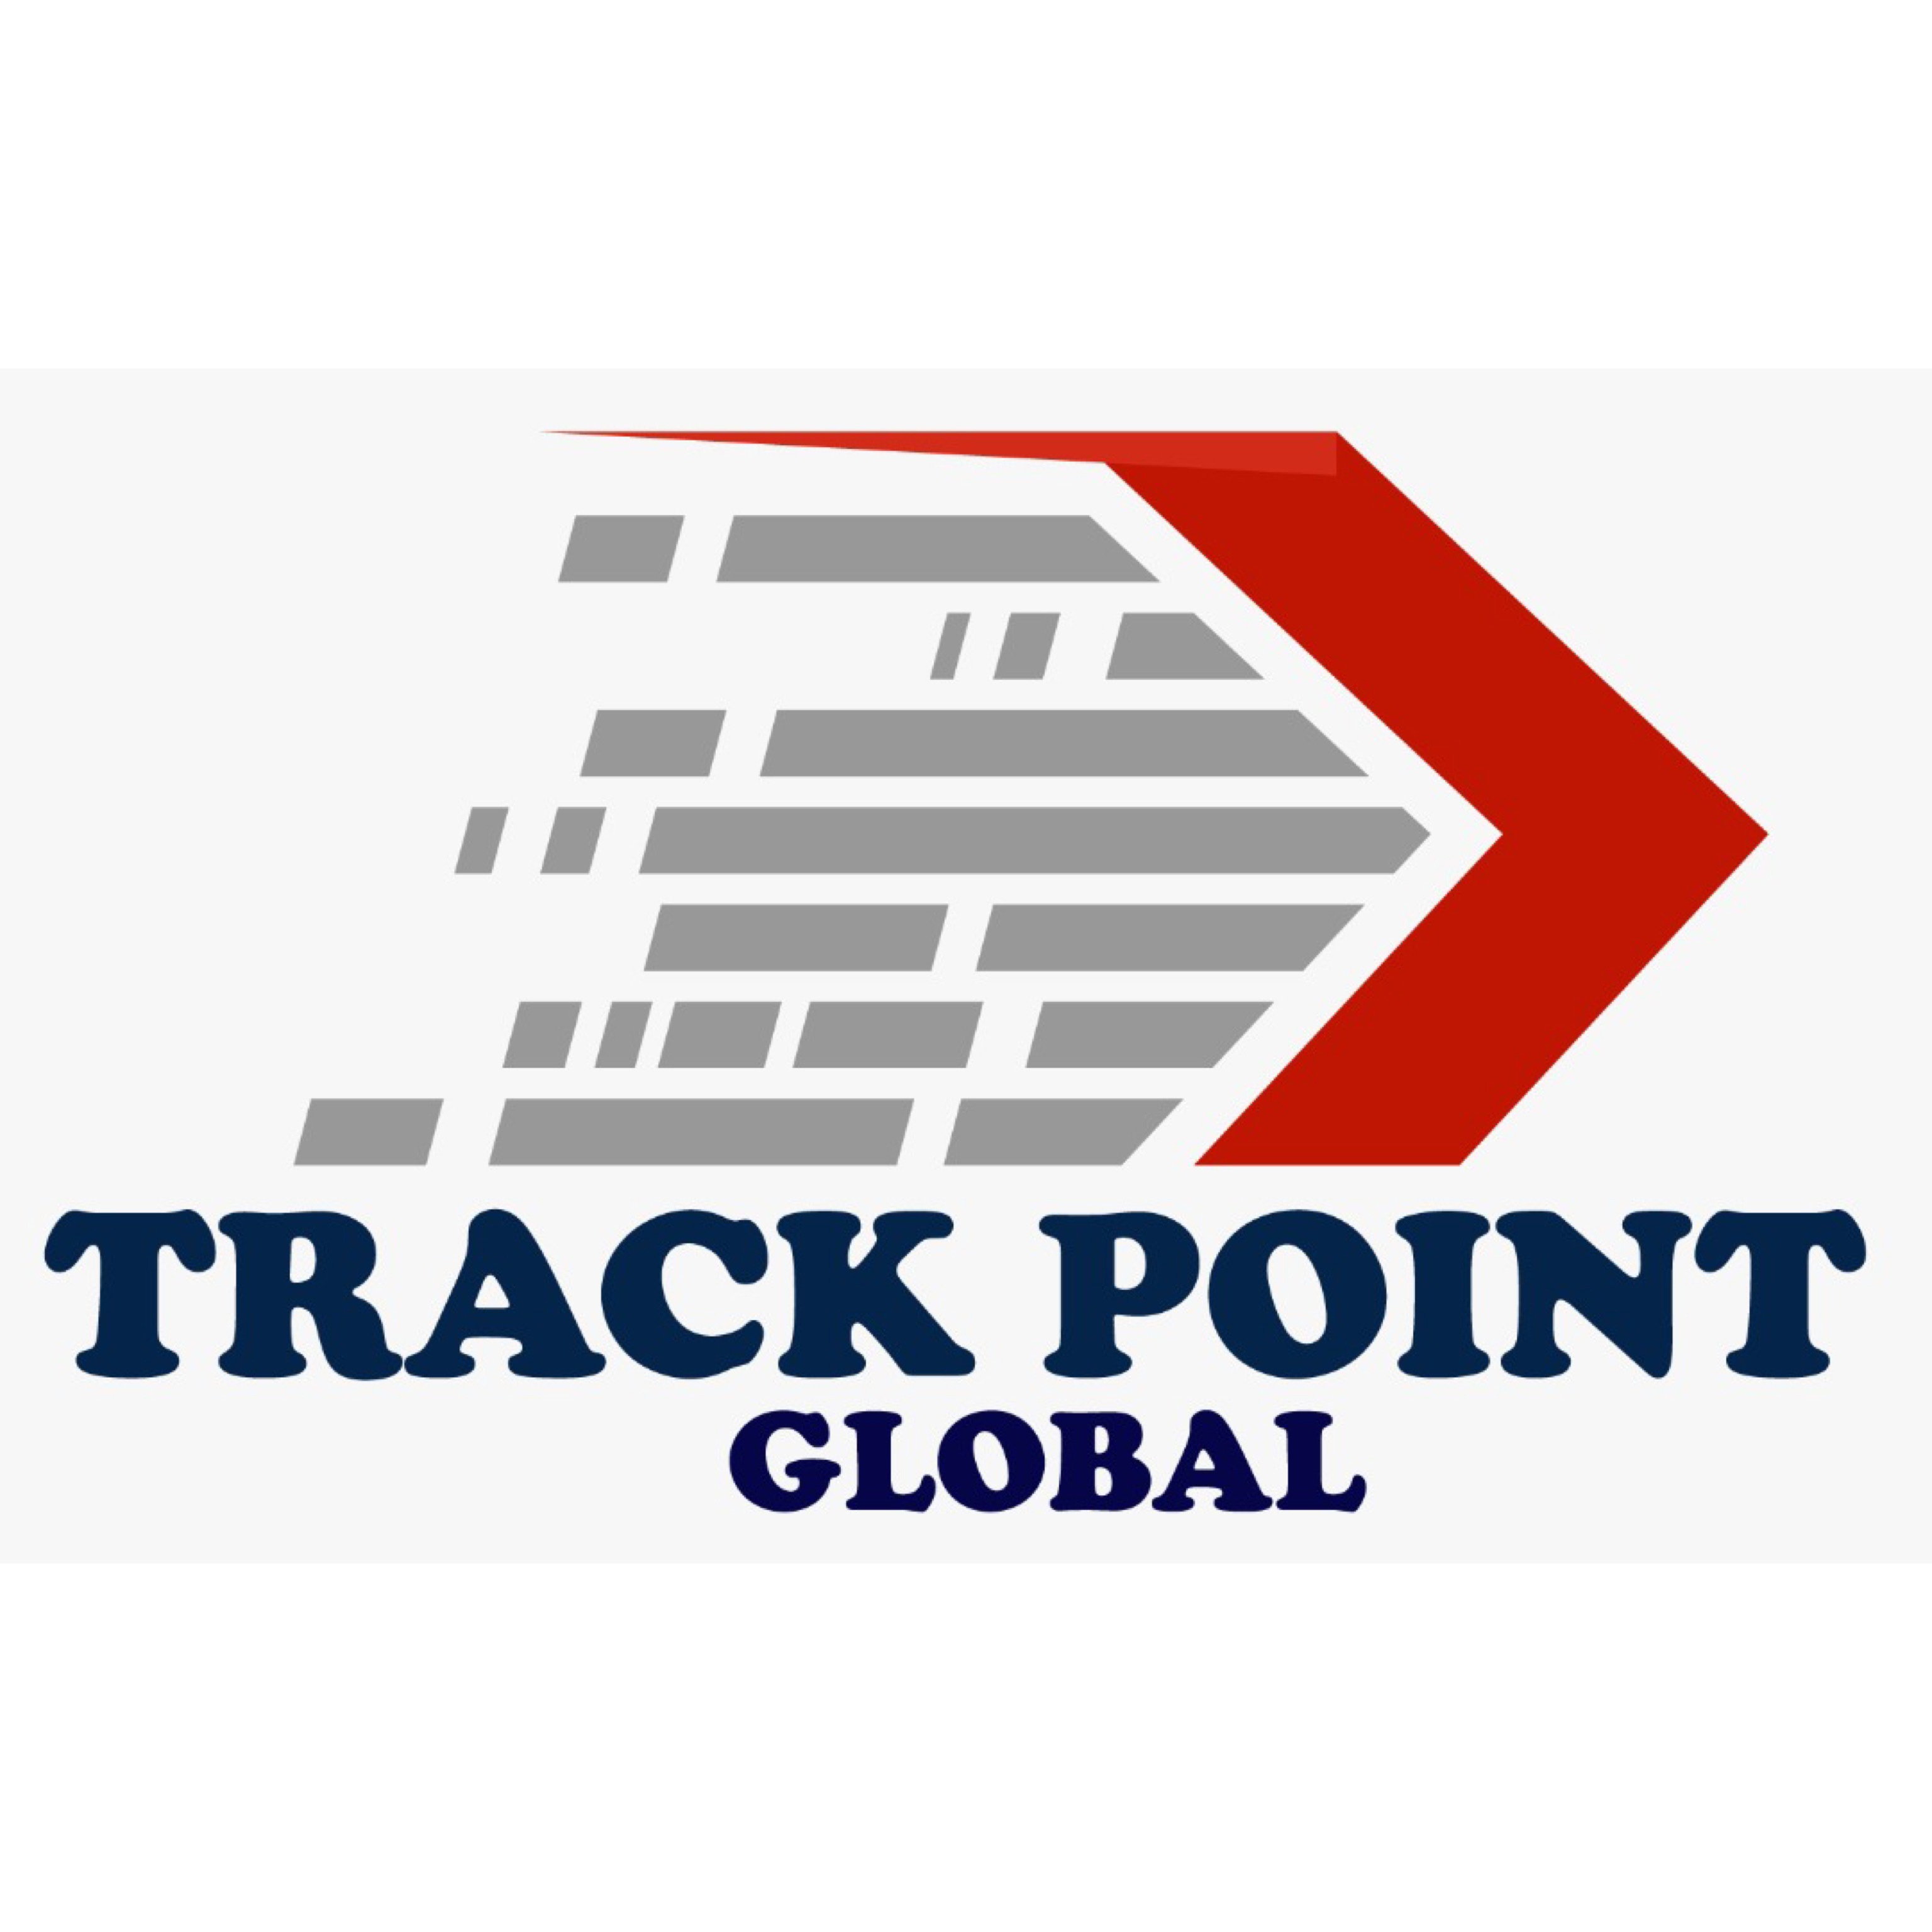 TRACK POINT GLOBAL RESOURCES LTD.